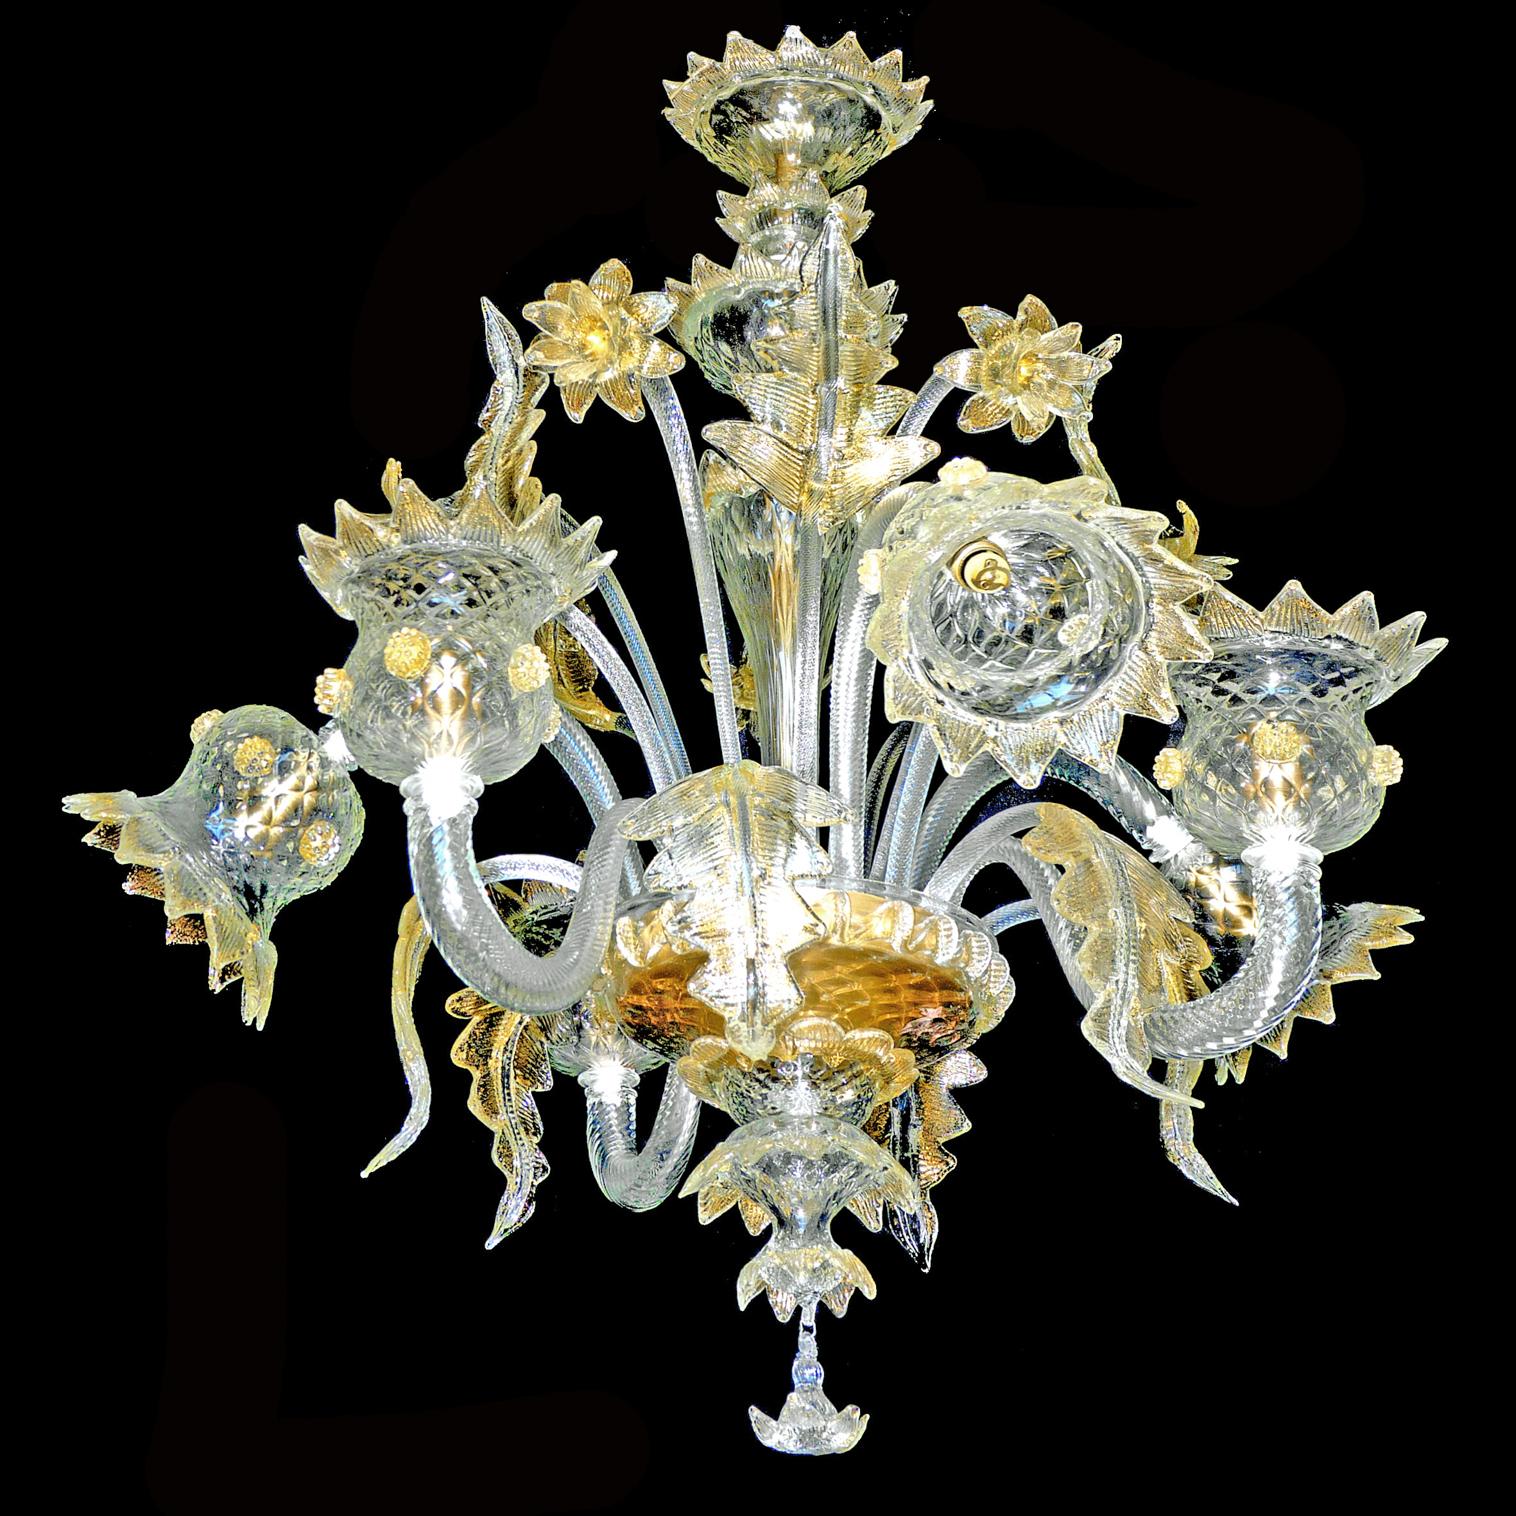 Majestic blown glass chandelier with colorful decorations with 24-carat gold leaf that give the chandelier light greater warmth and a wonderful atmosphere. One of the most splendid works by Master Vidreiro Fabiano Zanchi de Murano, appreciated